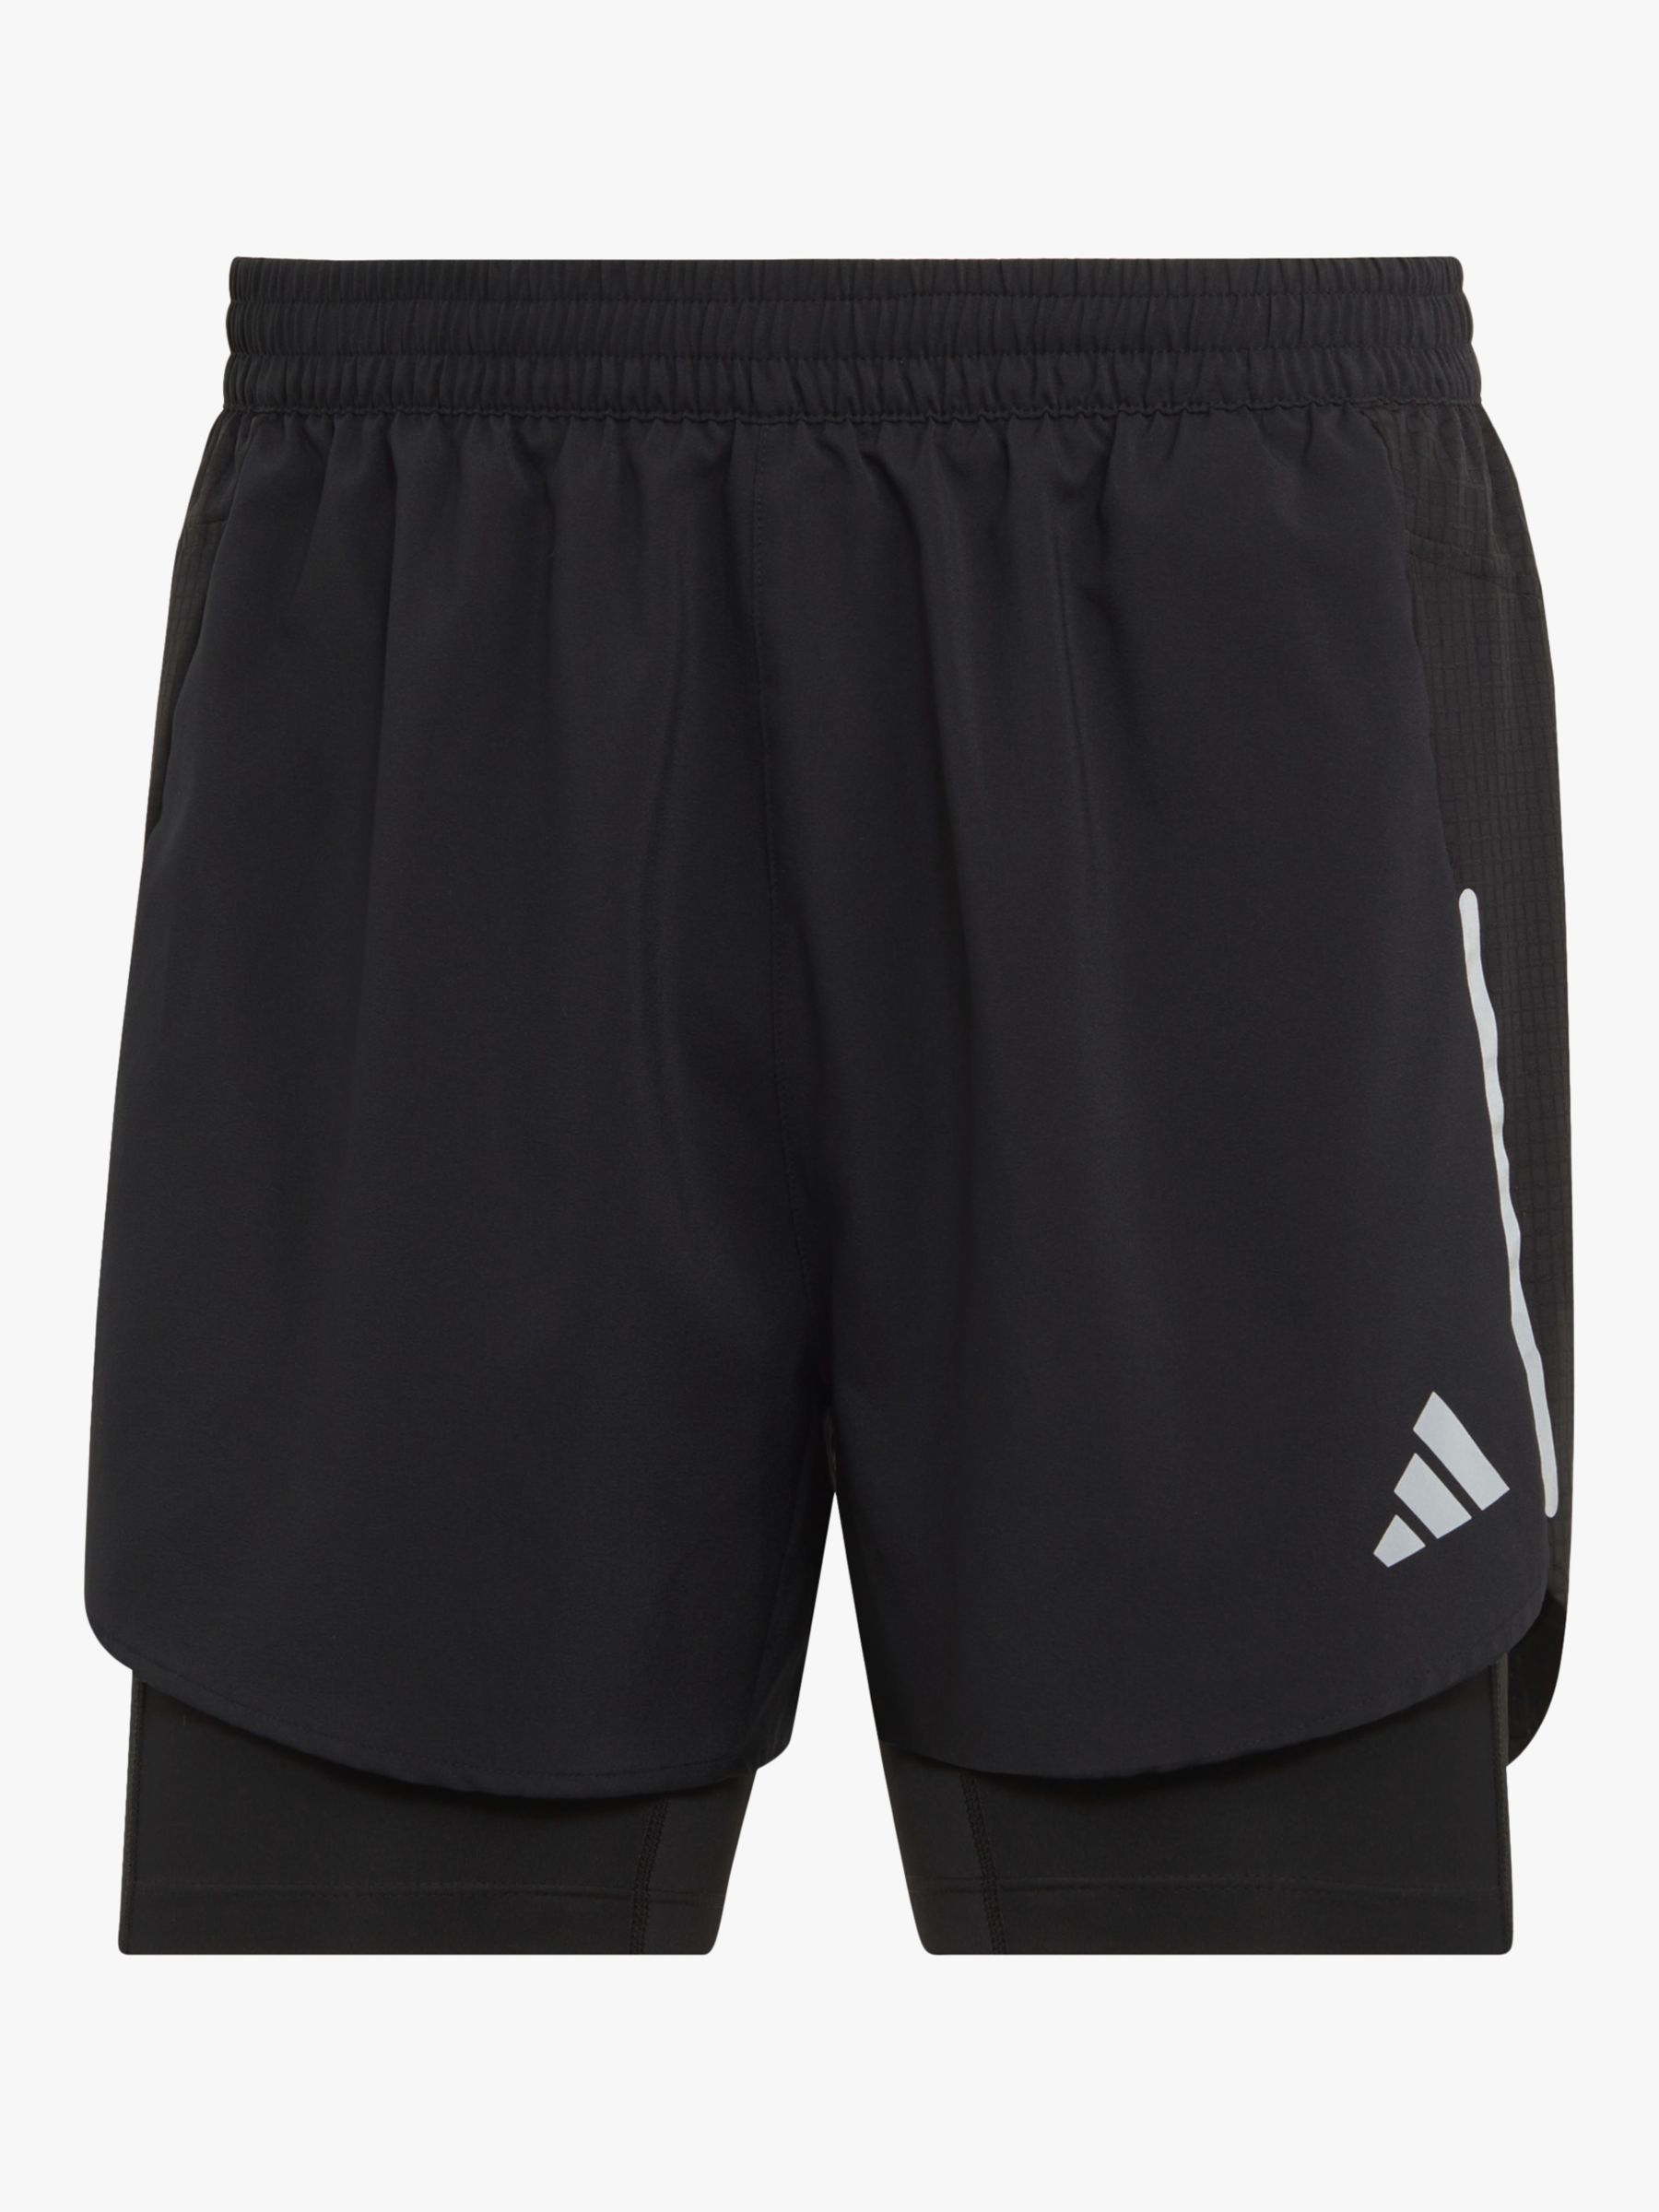 adidas Designed for Running 2-in-1 Recycled Running Shorts, Black, S